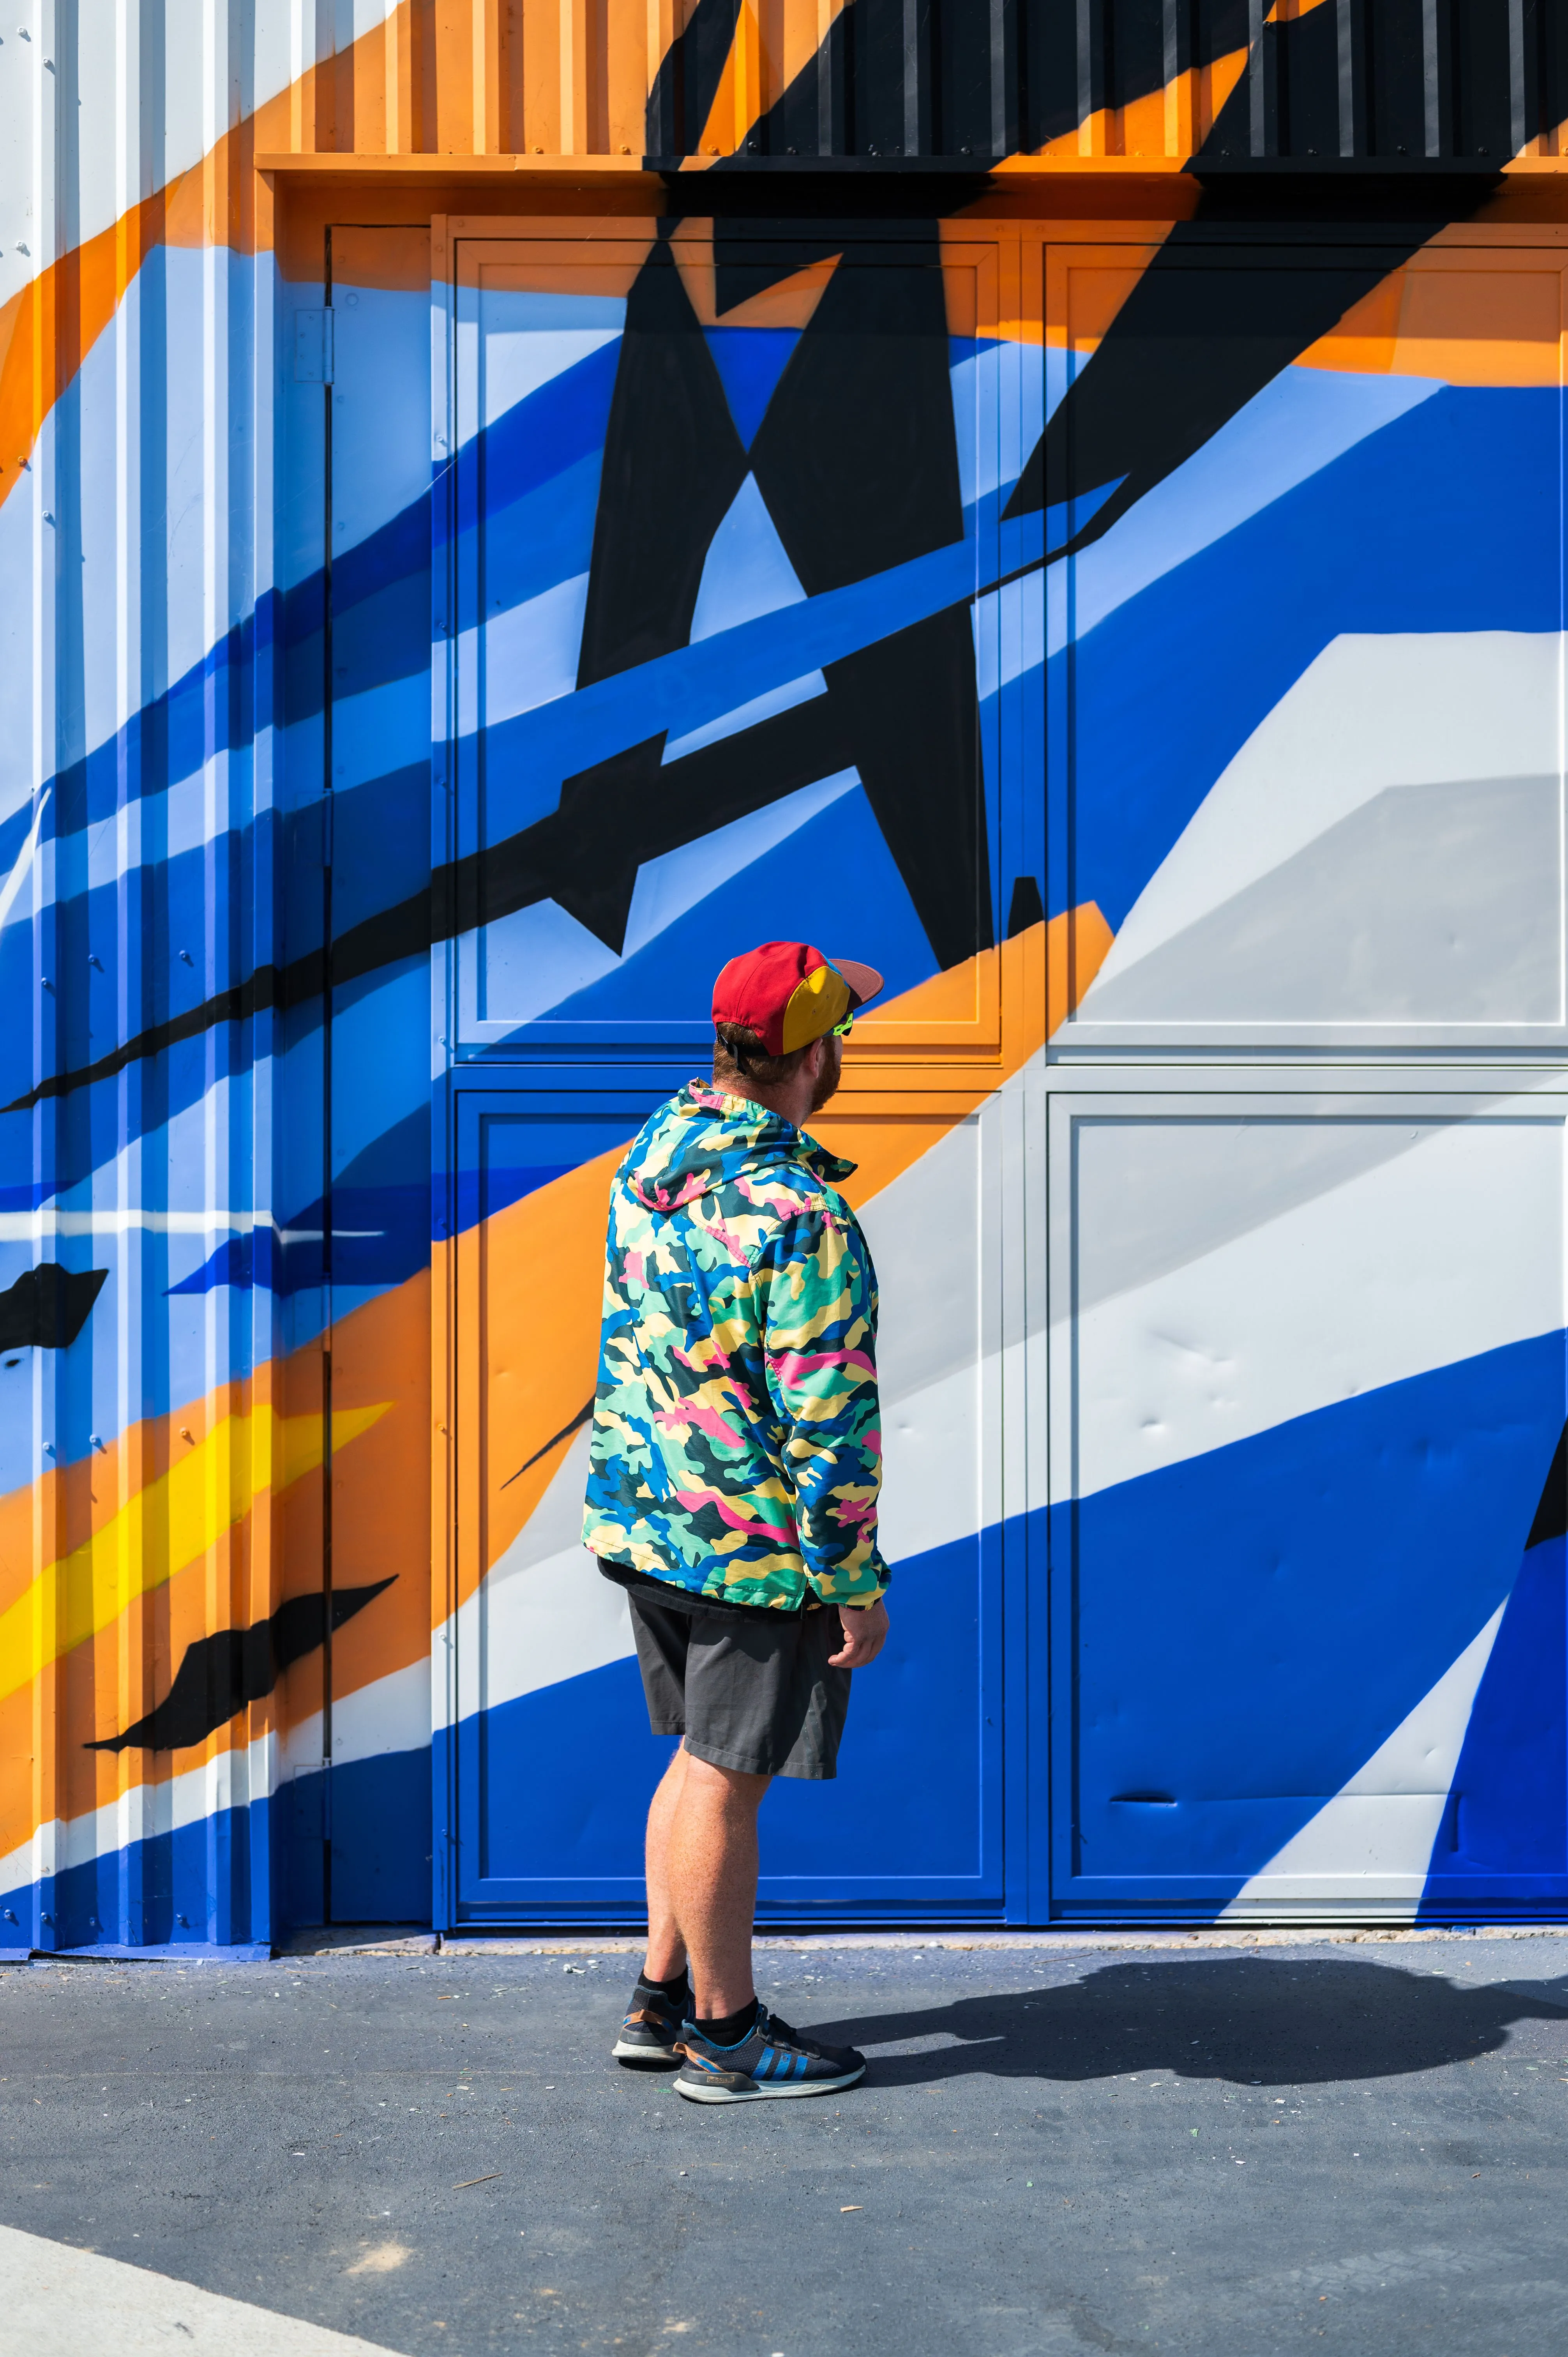 Person standing in front of a colorful geometric mural painted on shipping containers.